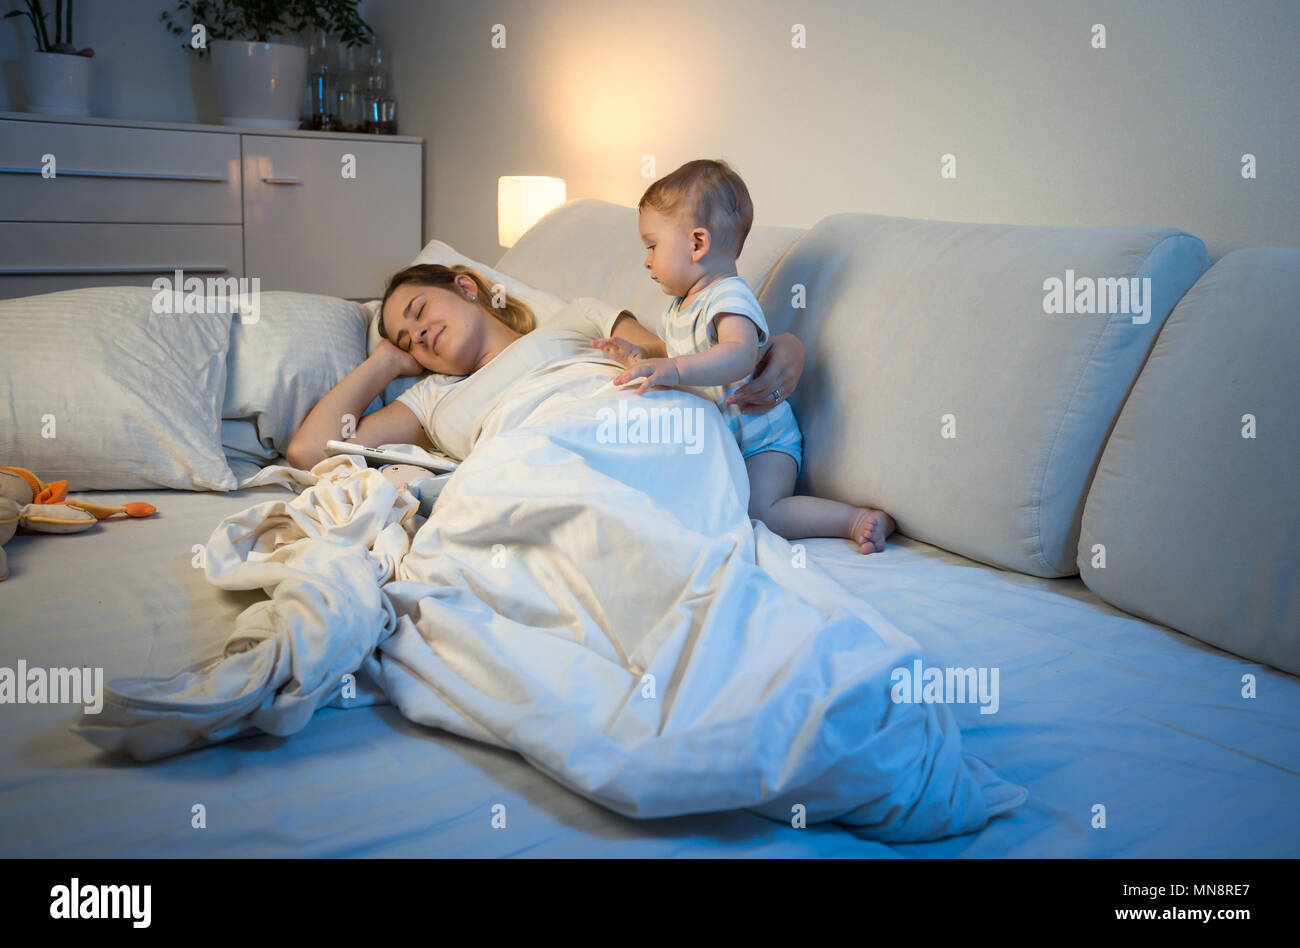 Young mother fell asleep next to her baby boy in bed Stock Photo